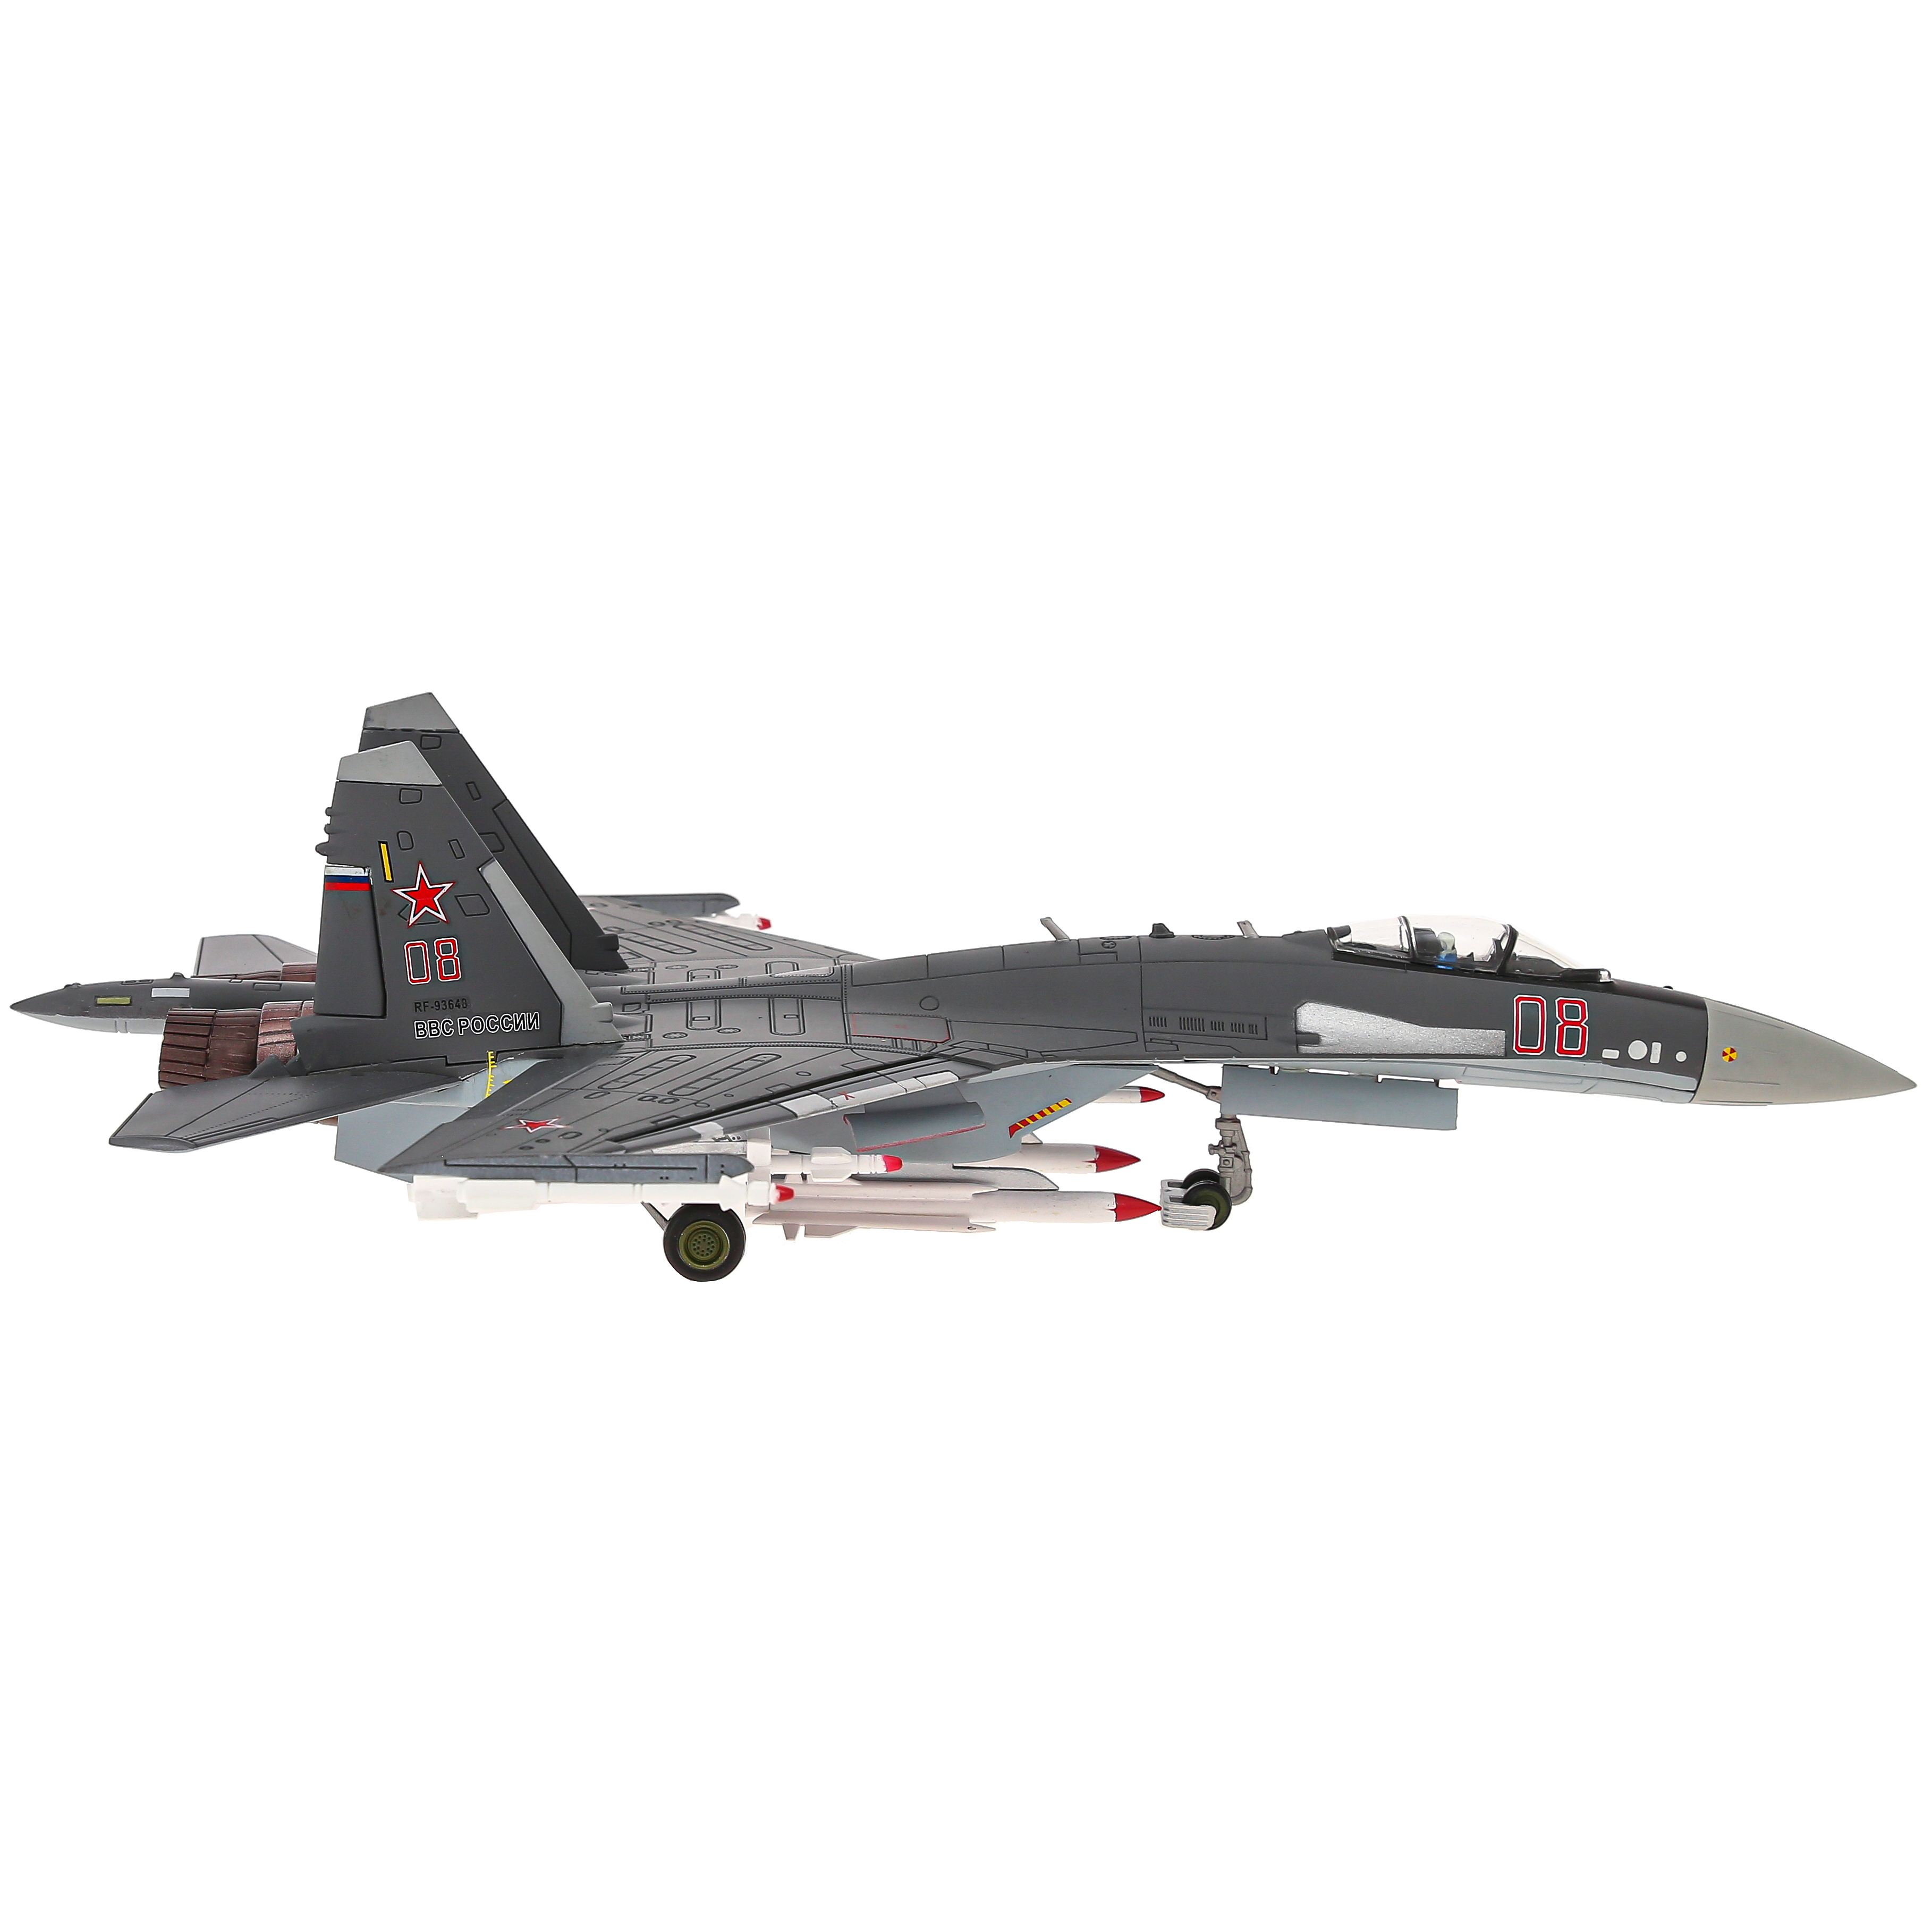    -35,  1:72 ,   32 . The model of the Russian Su-35 fighter, scale 1:72 metal, the length of the model is 32 cm. # 4 hobbyplus.ru